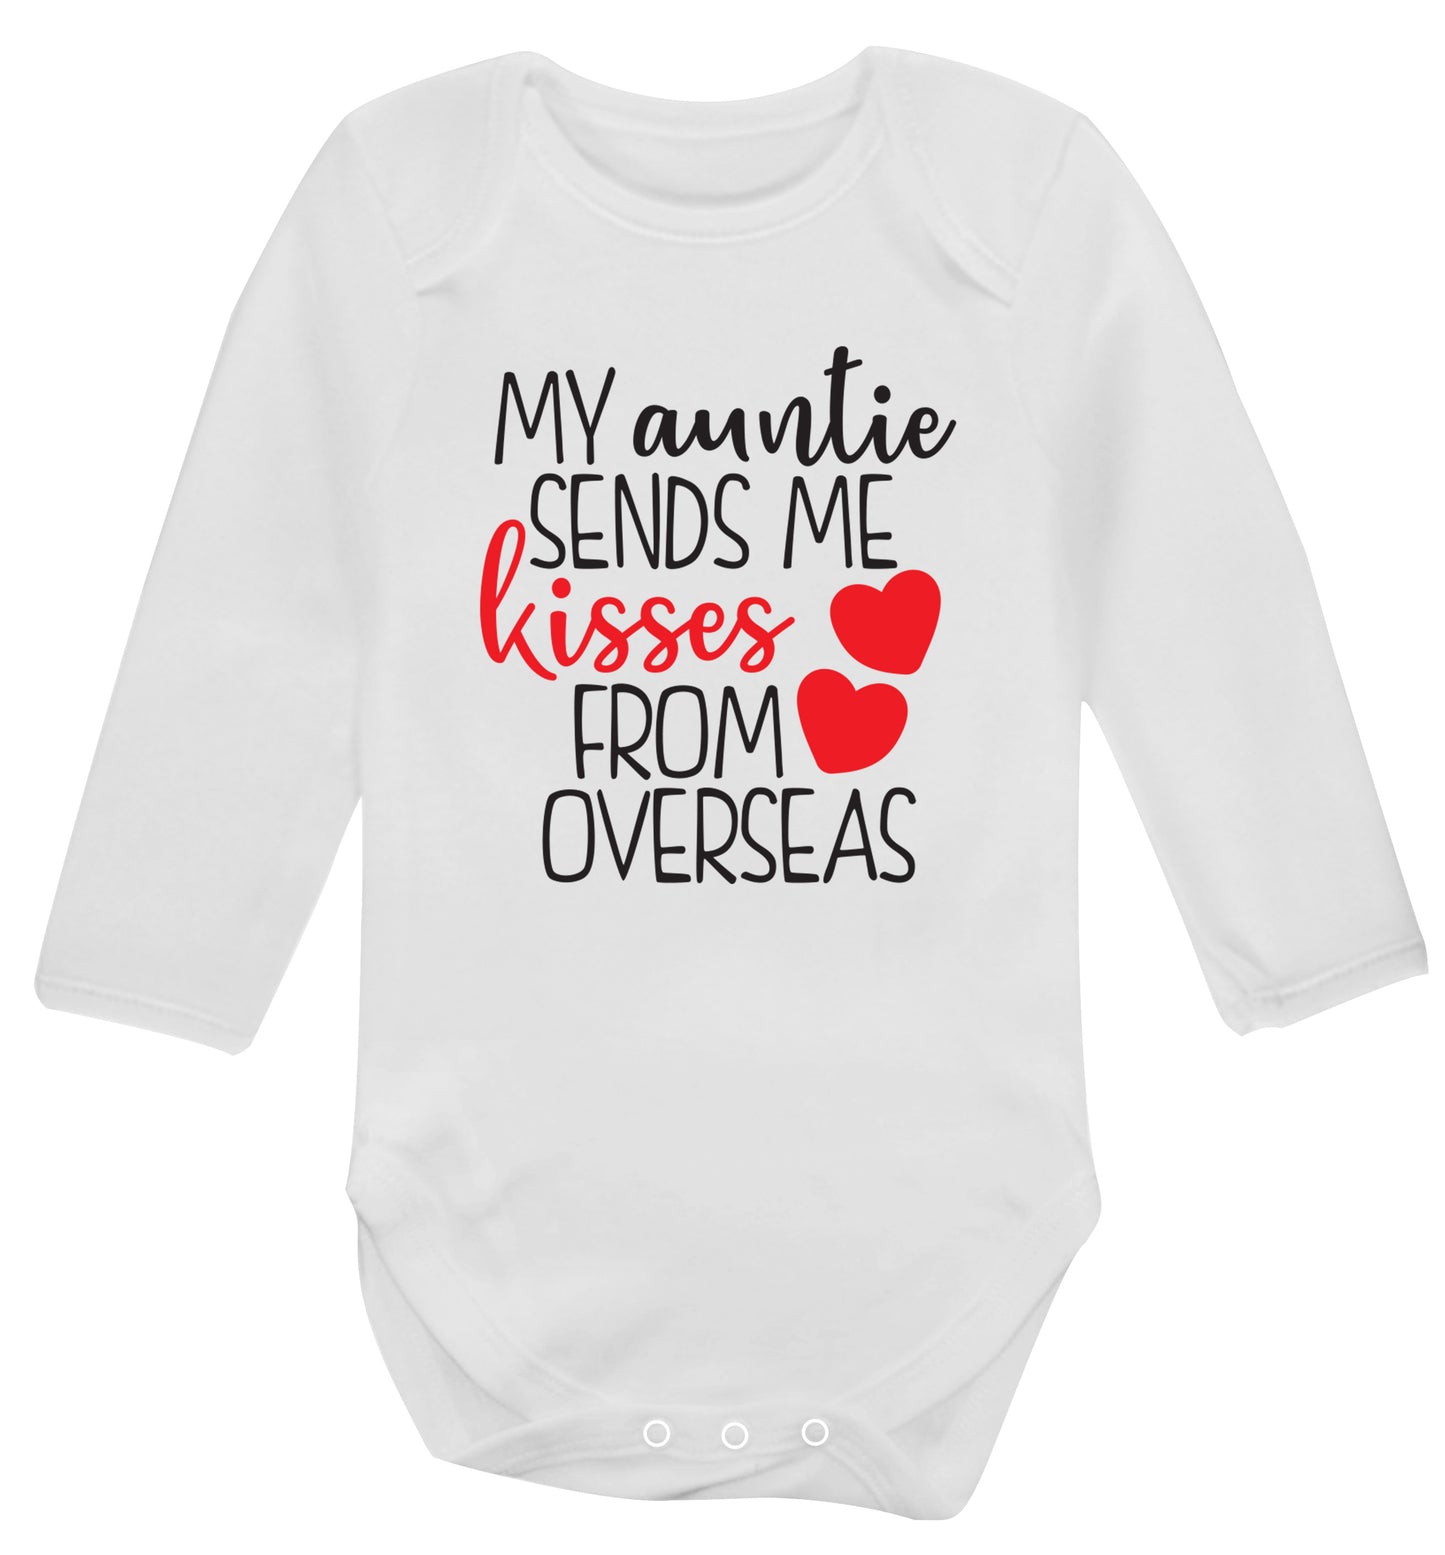 My auntie sends me kisses from overseas Baby Vest long sleeved white 6-12 months